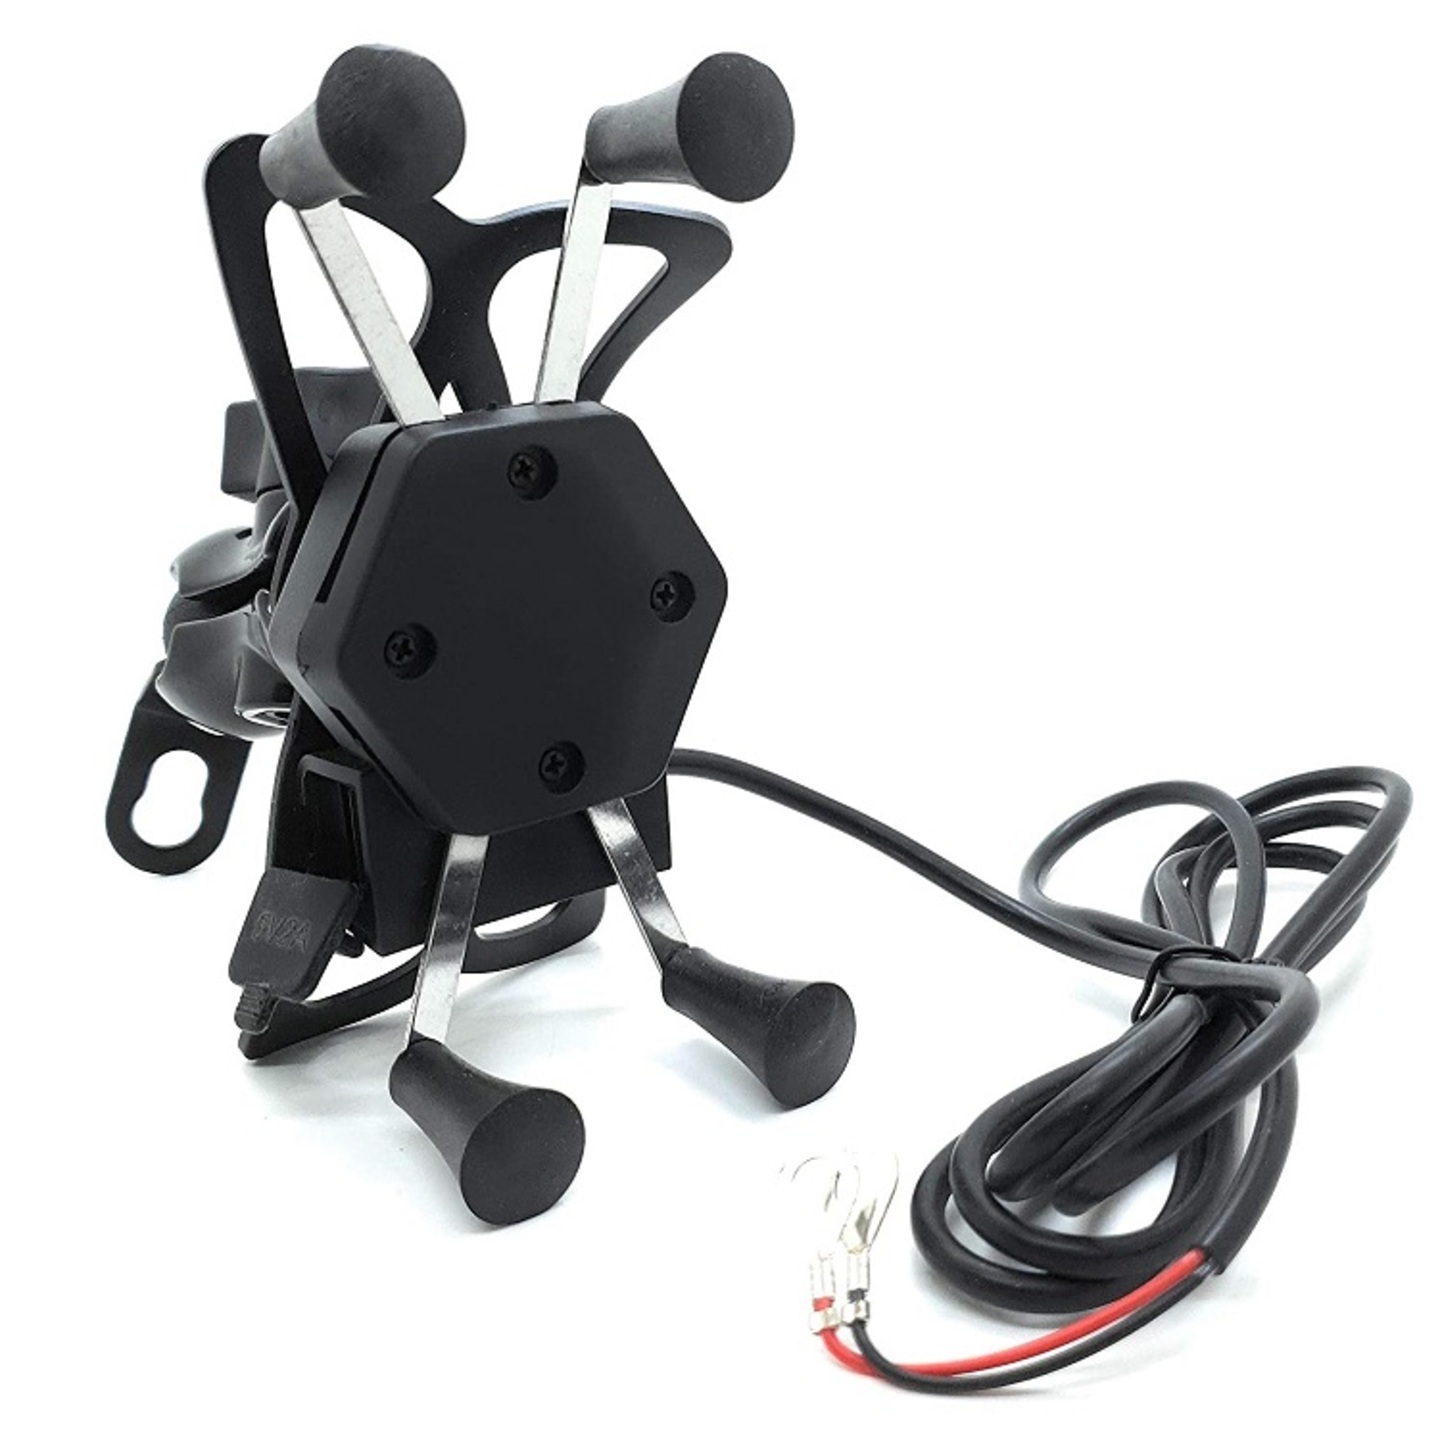 Universal Bike Mobile Holder with USB Charger Port and 360 Degree Rotation